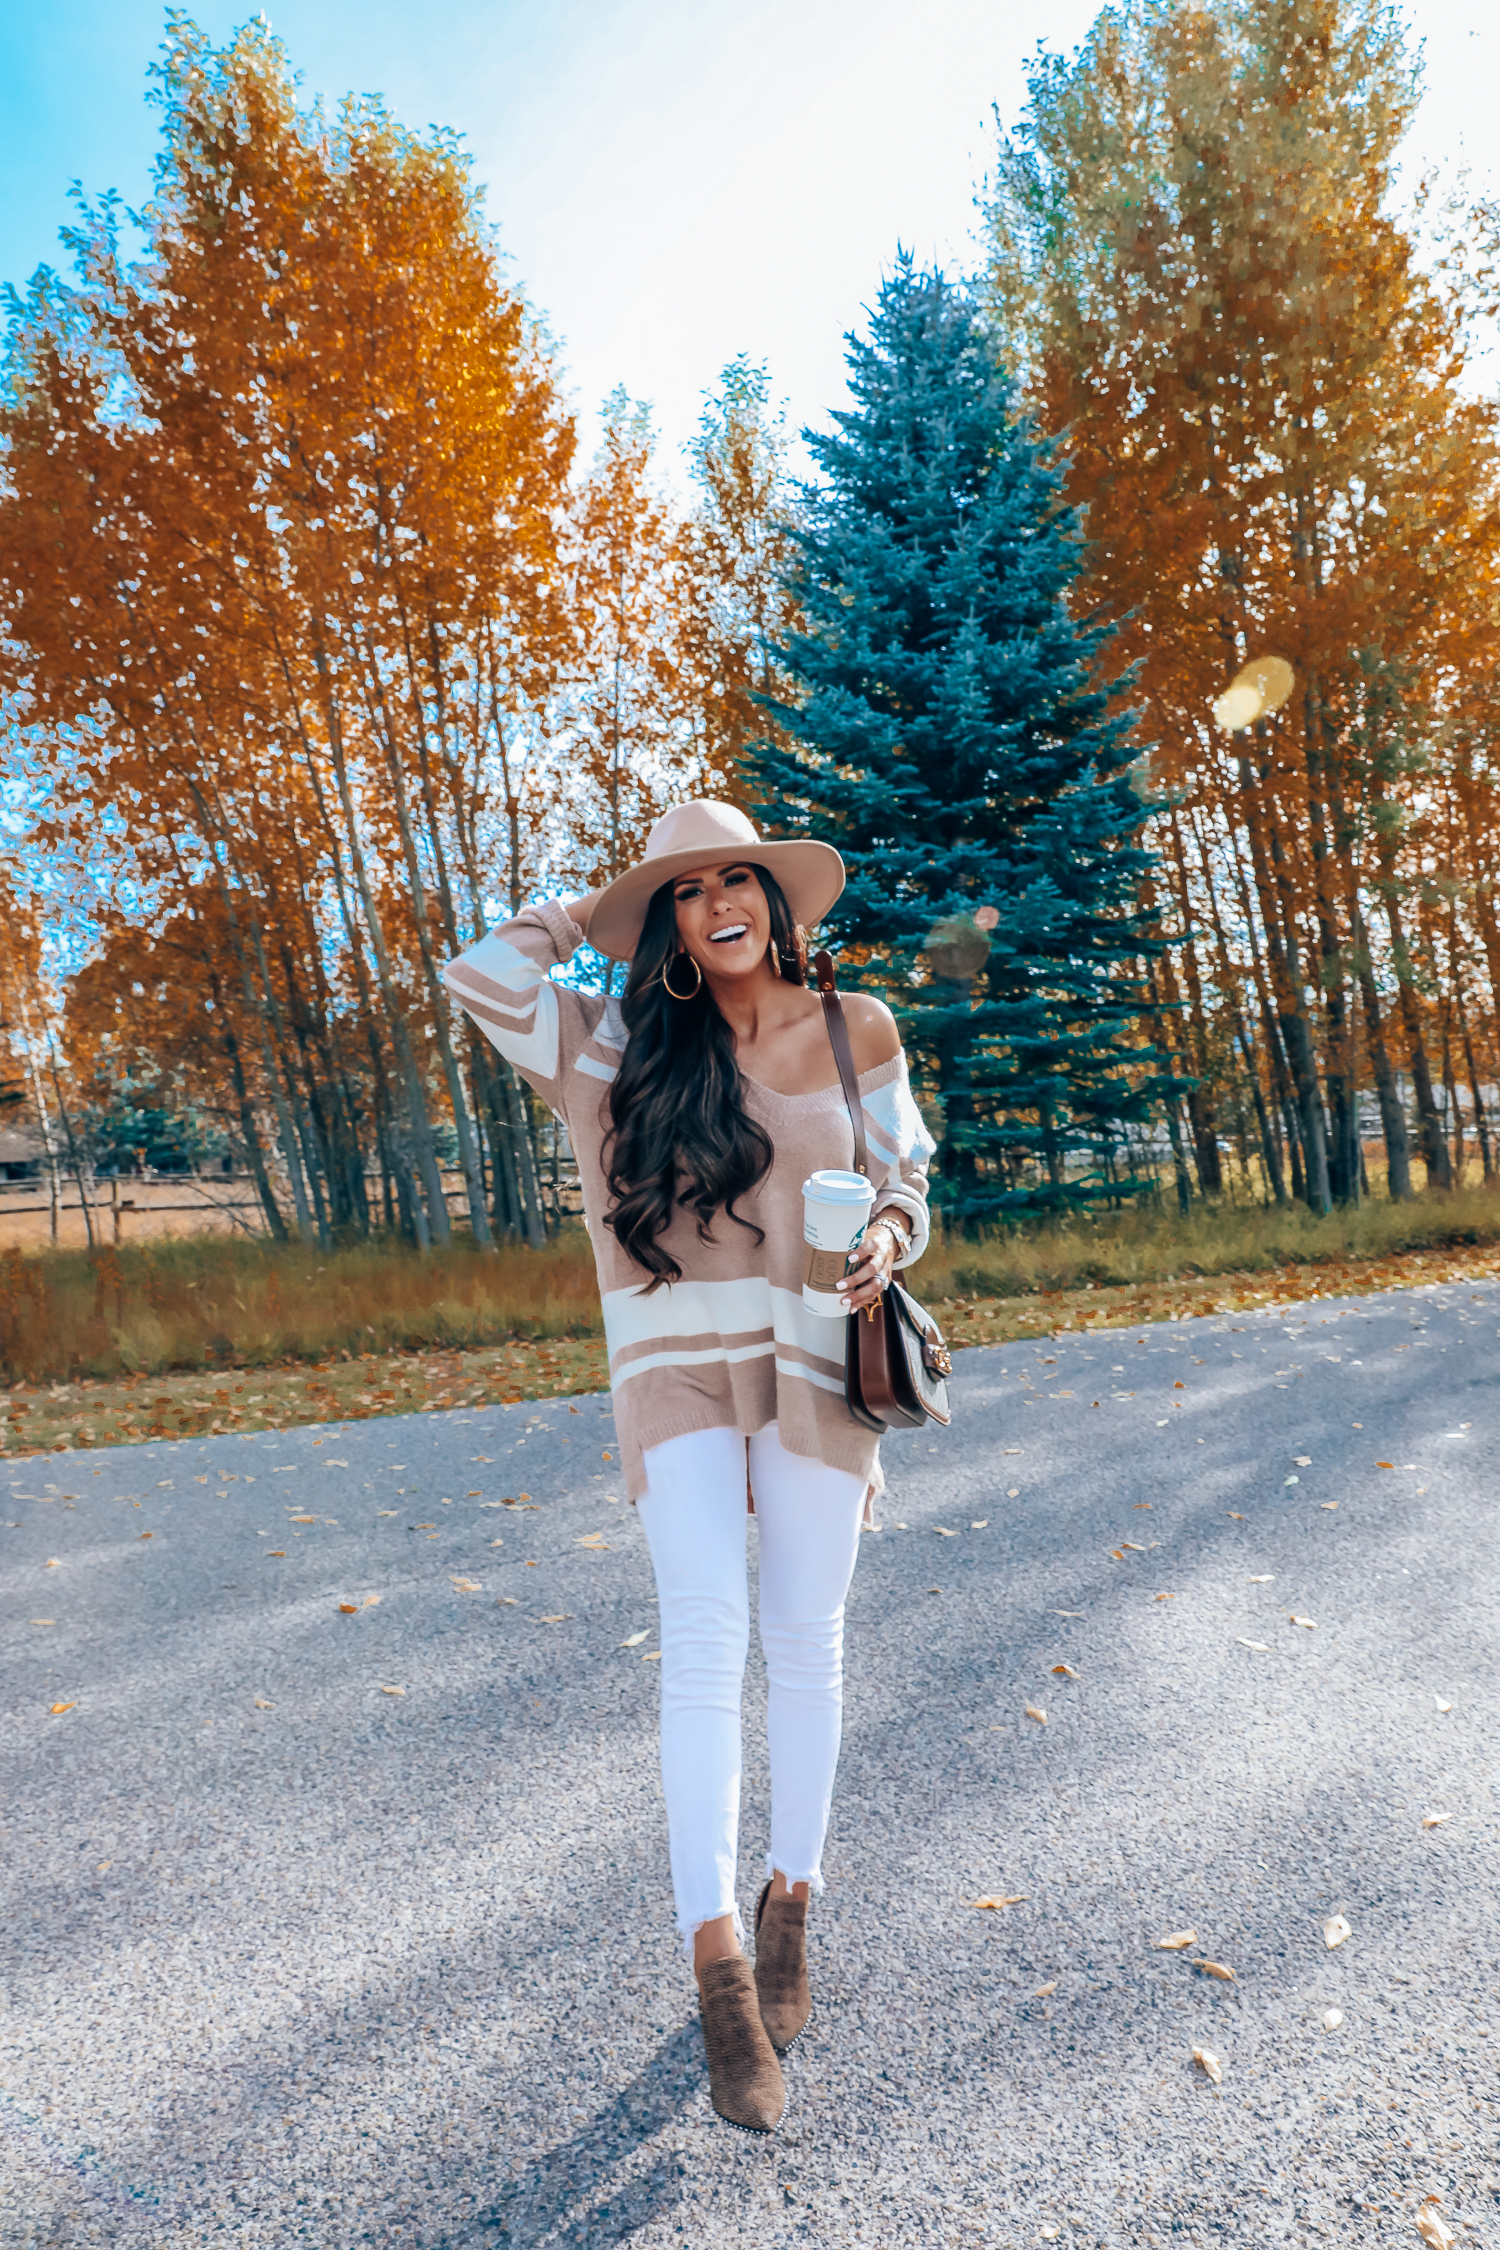 Rag and Bone White Jeans style for Fall by top US fashion blog, The Sweetest Thing: image of a woman wearing Rag and Bone white denim jeans, a Red Dress Boutique off the shoulder striped sweater, Gianni Bini boots, Gucci 1955 shoulder bag, Brixton Panama hat, Rolex watch, Cartier bracelets, Argento Vivo earrings, and a Free People ring | fall fashion outfits pinterest 2019, gucci vintage 1955 bag, fall outfits white denim, red dress boutique sweater, brixton hats-5